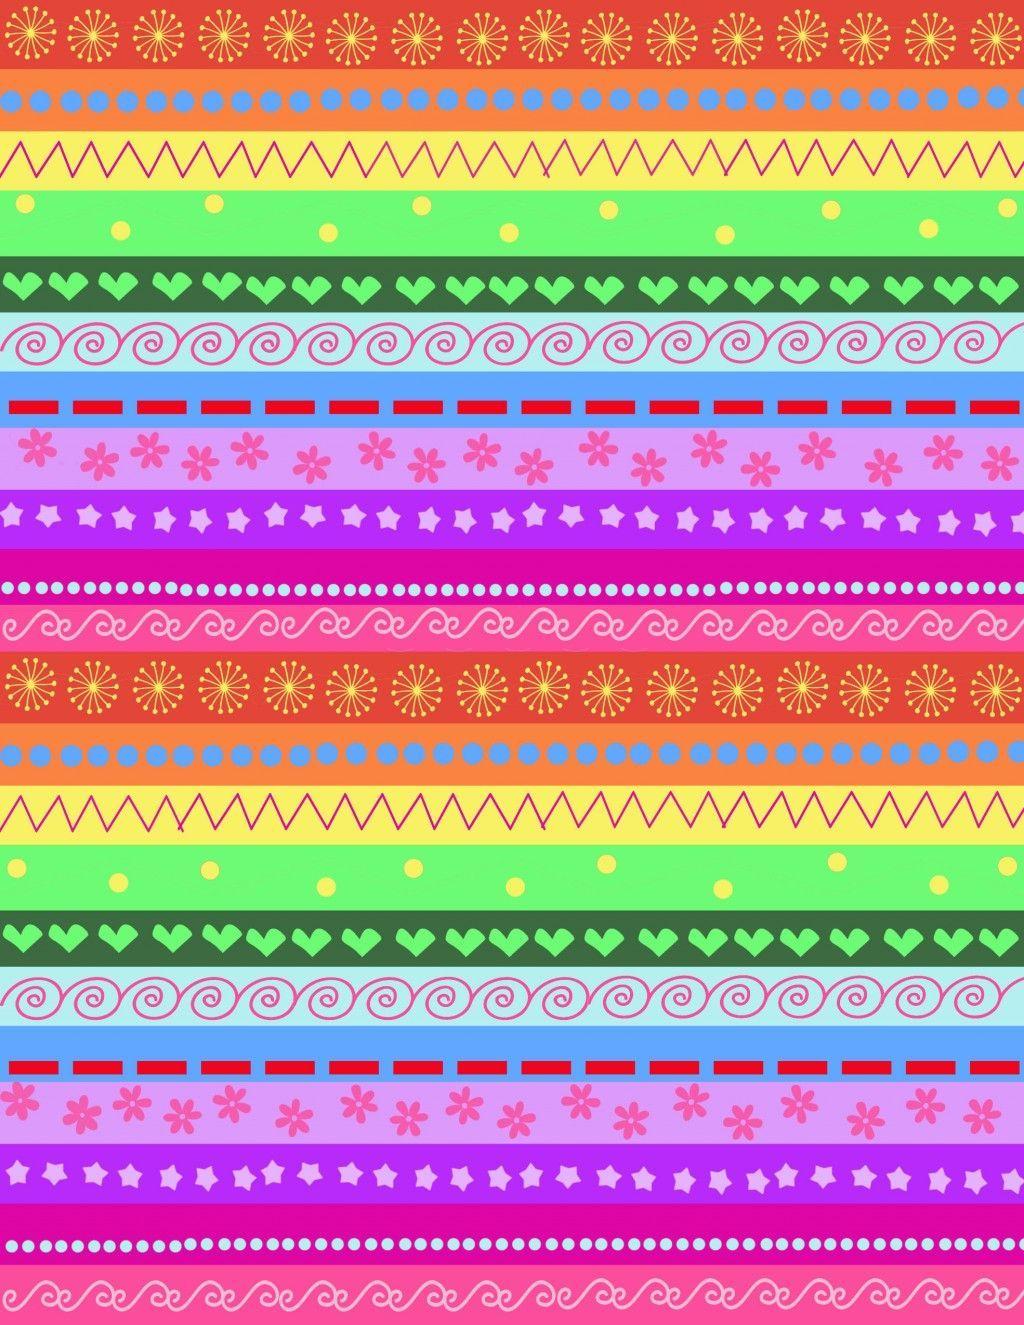 Free Printable Paper Pack: Bright, Fun Colors and Patterns. Hojas